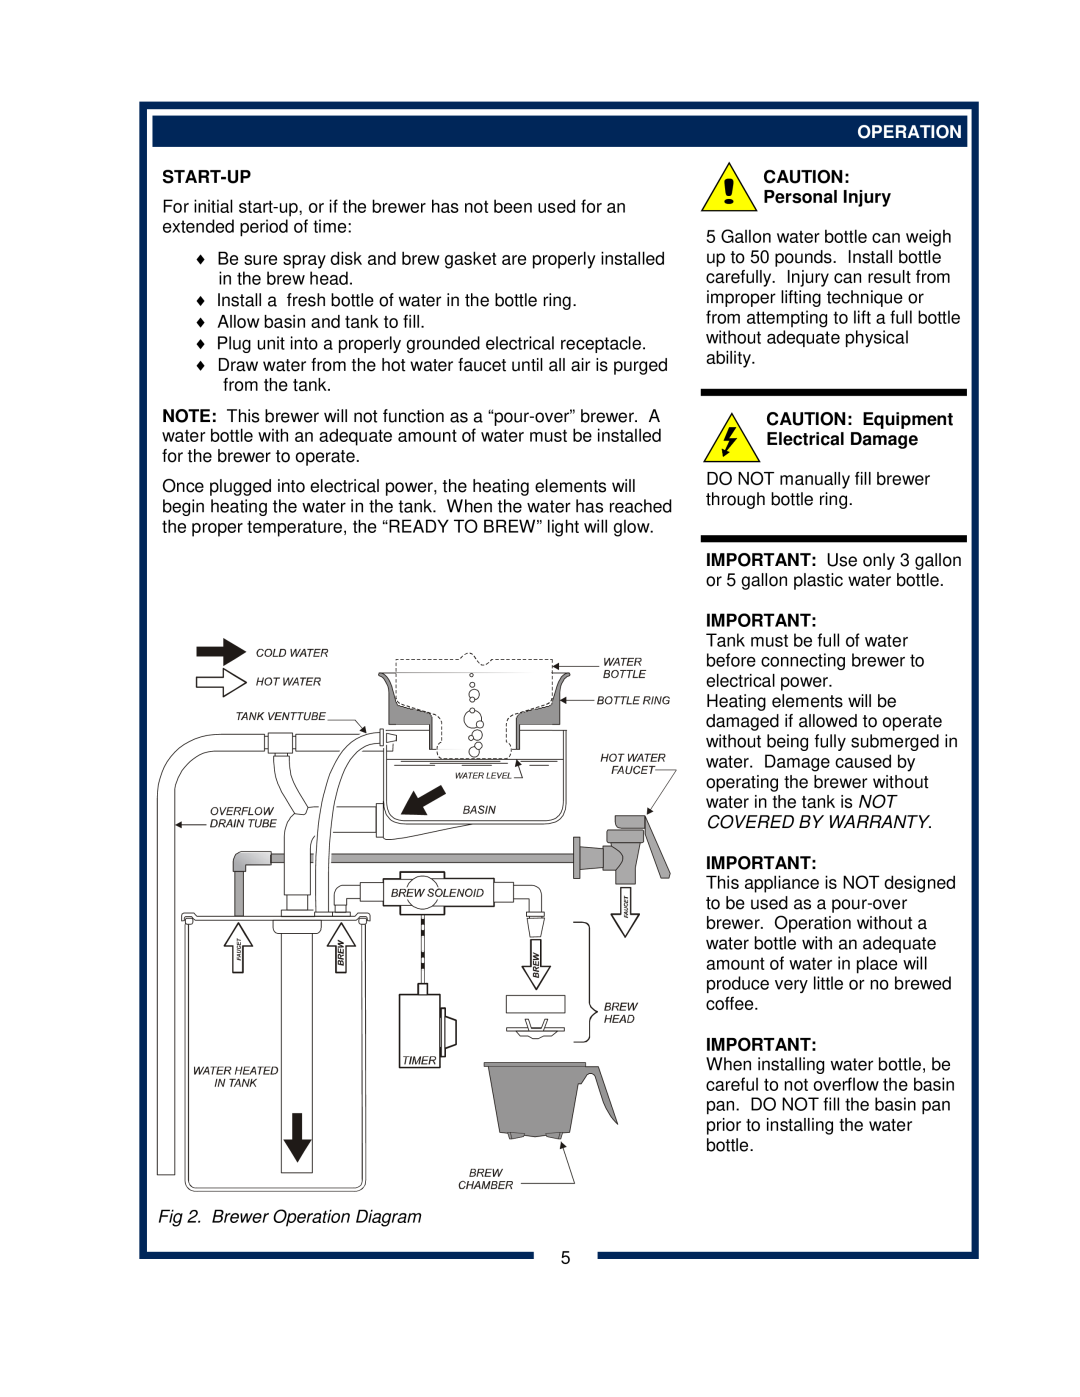 Bloomfield 8372 owner manual Start-Up, Brewer Operation Diagram, Personal Injury, CAUTION Equipment Electrical Damage 